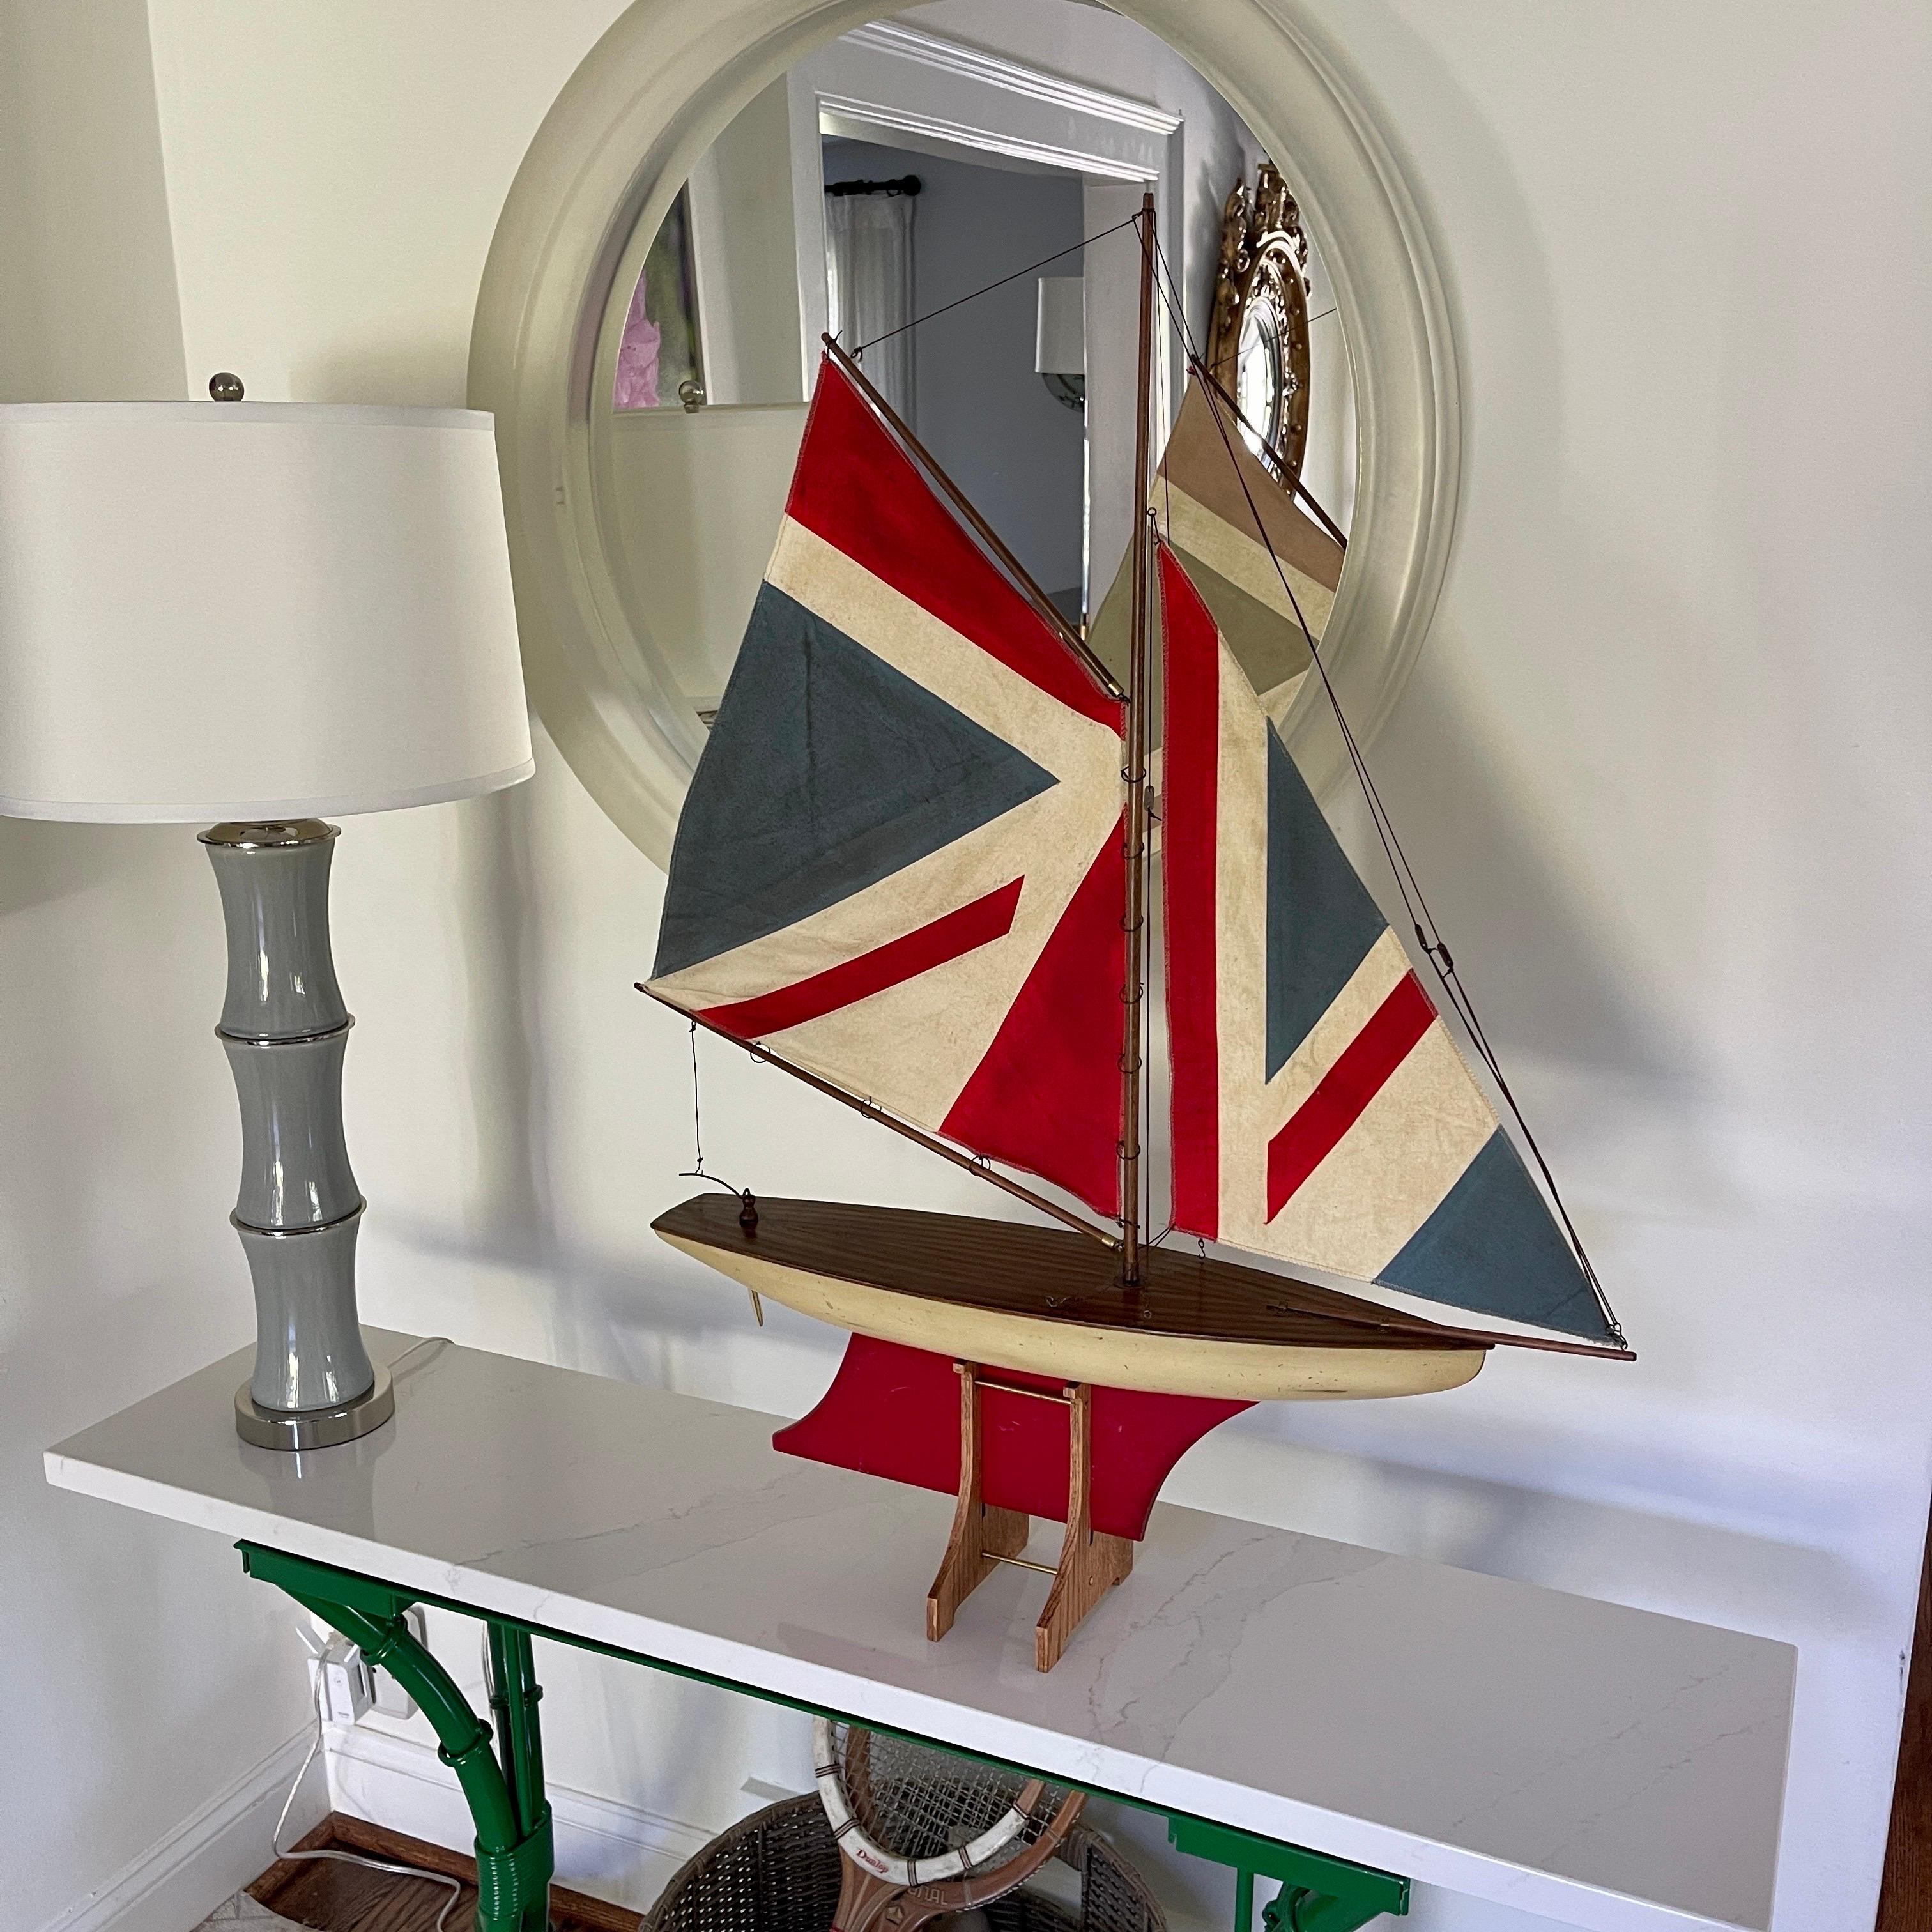 Vintage Miniature Ship Model of a Schooner with the union jack as Sailcloth, England, circa 1950s. 
This charming wooden English sailboat model is hand painted in off white and red. 
The deck portion is made in stunning wooden parquetry